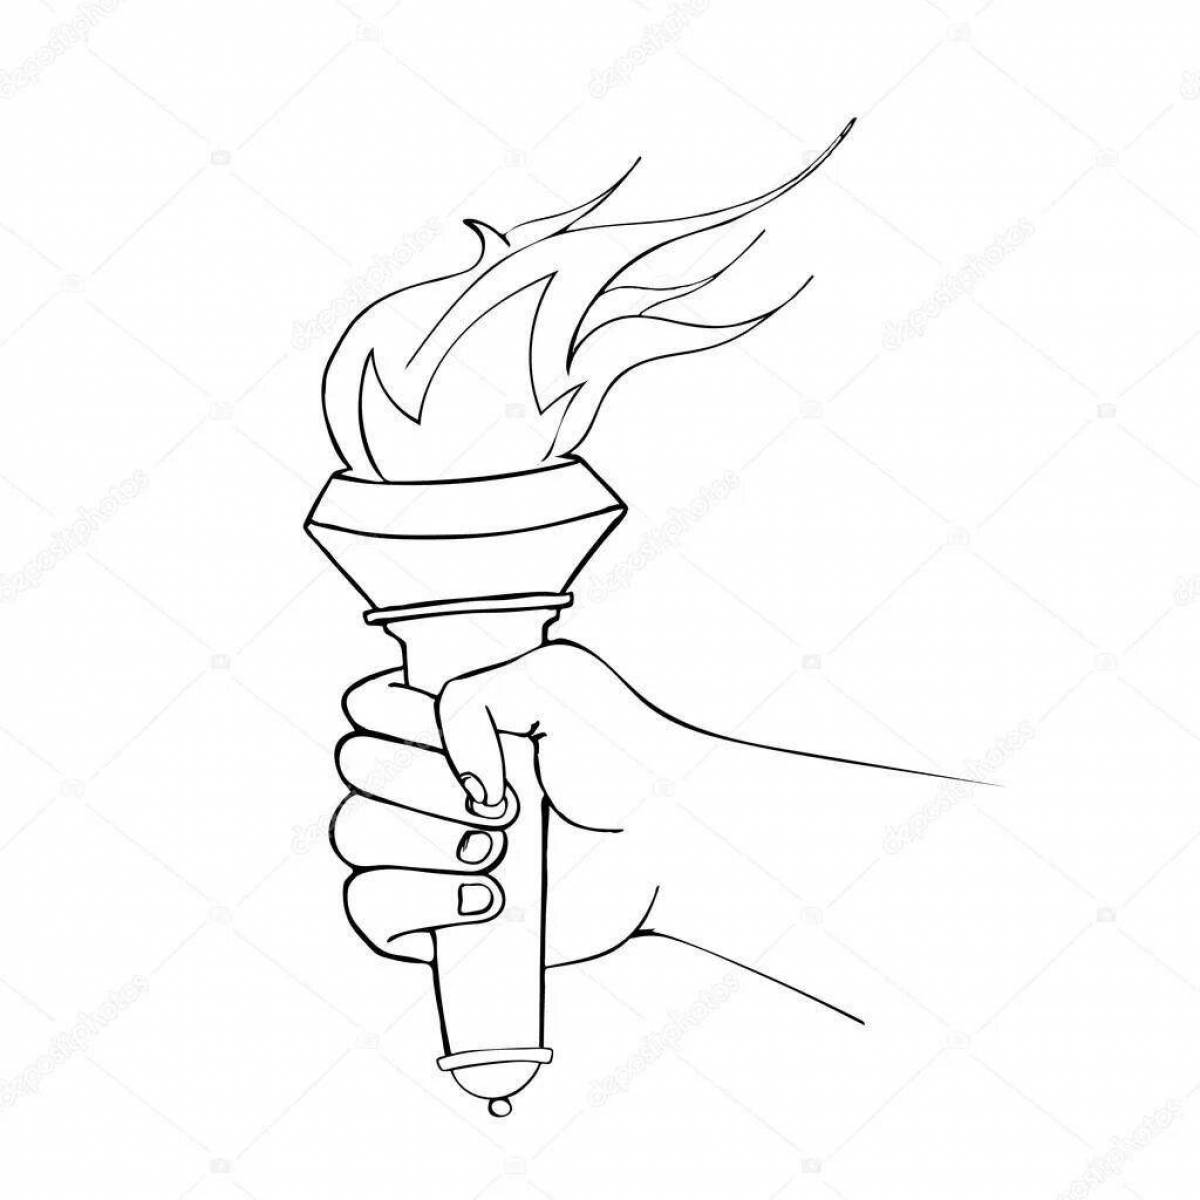 Coloring page magnificent olympic flame